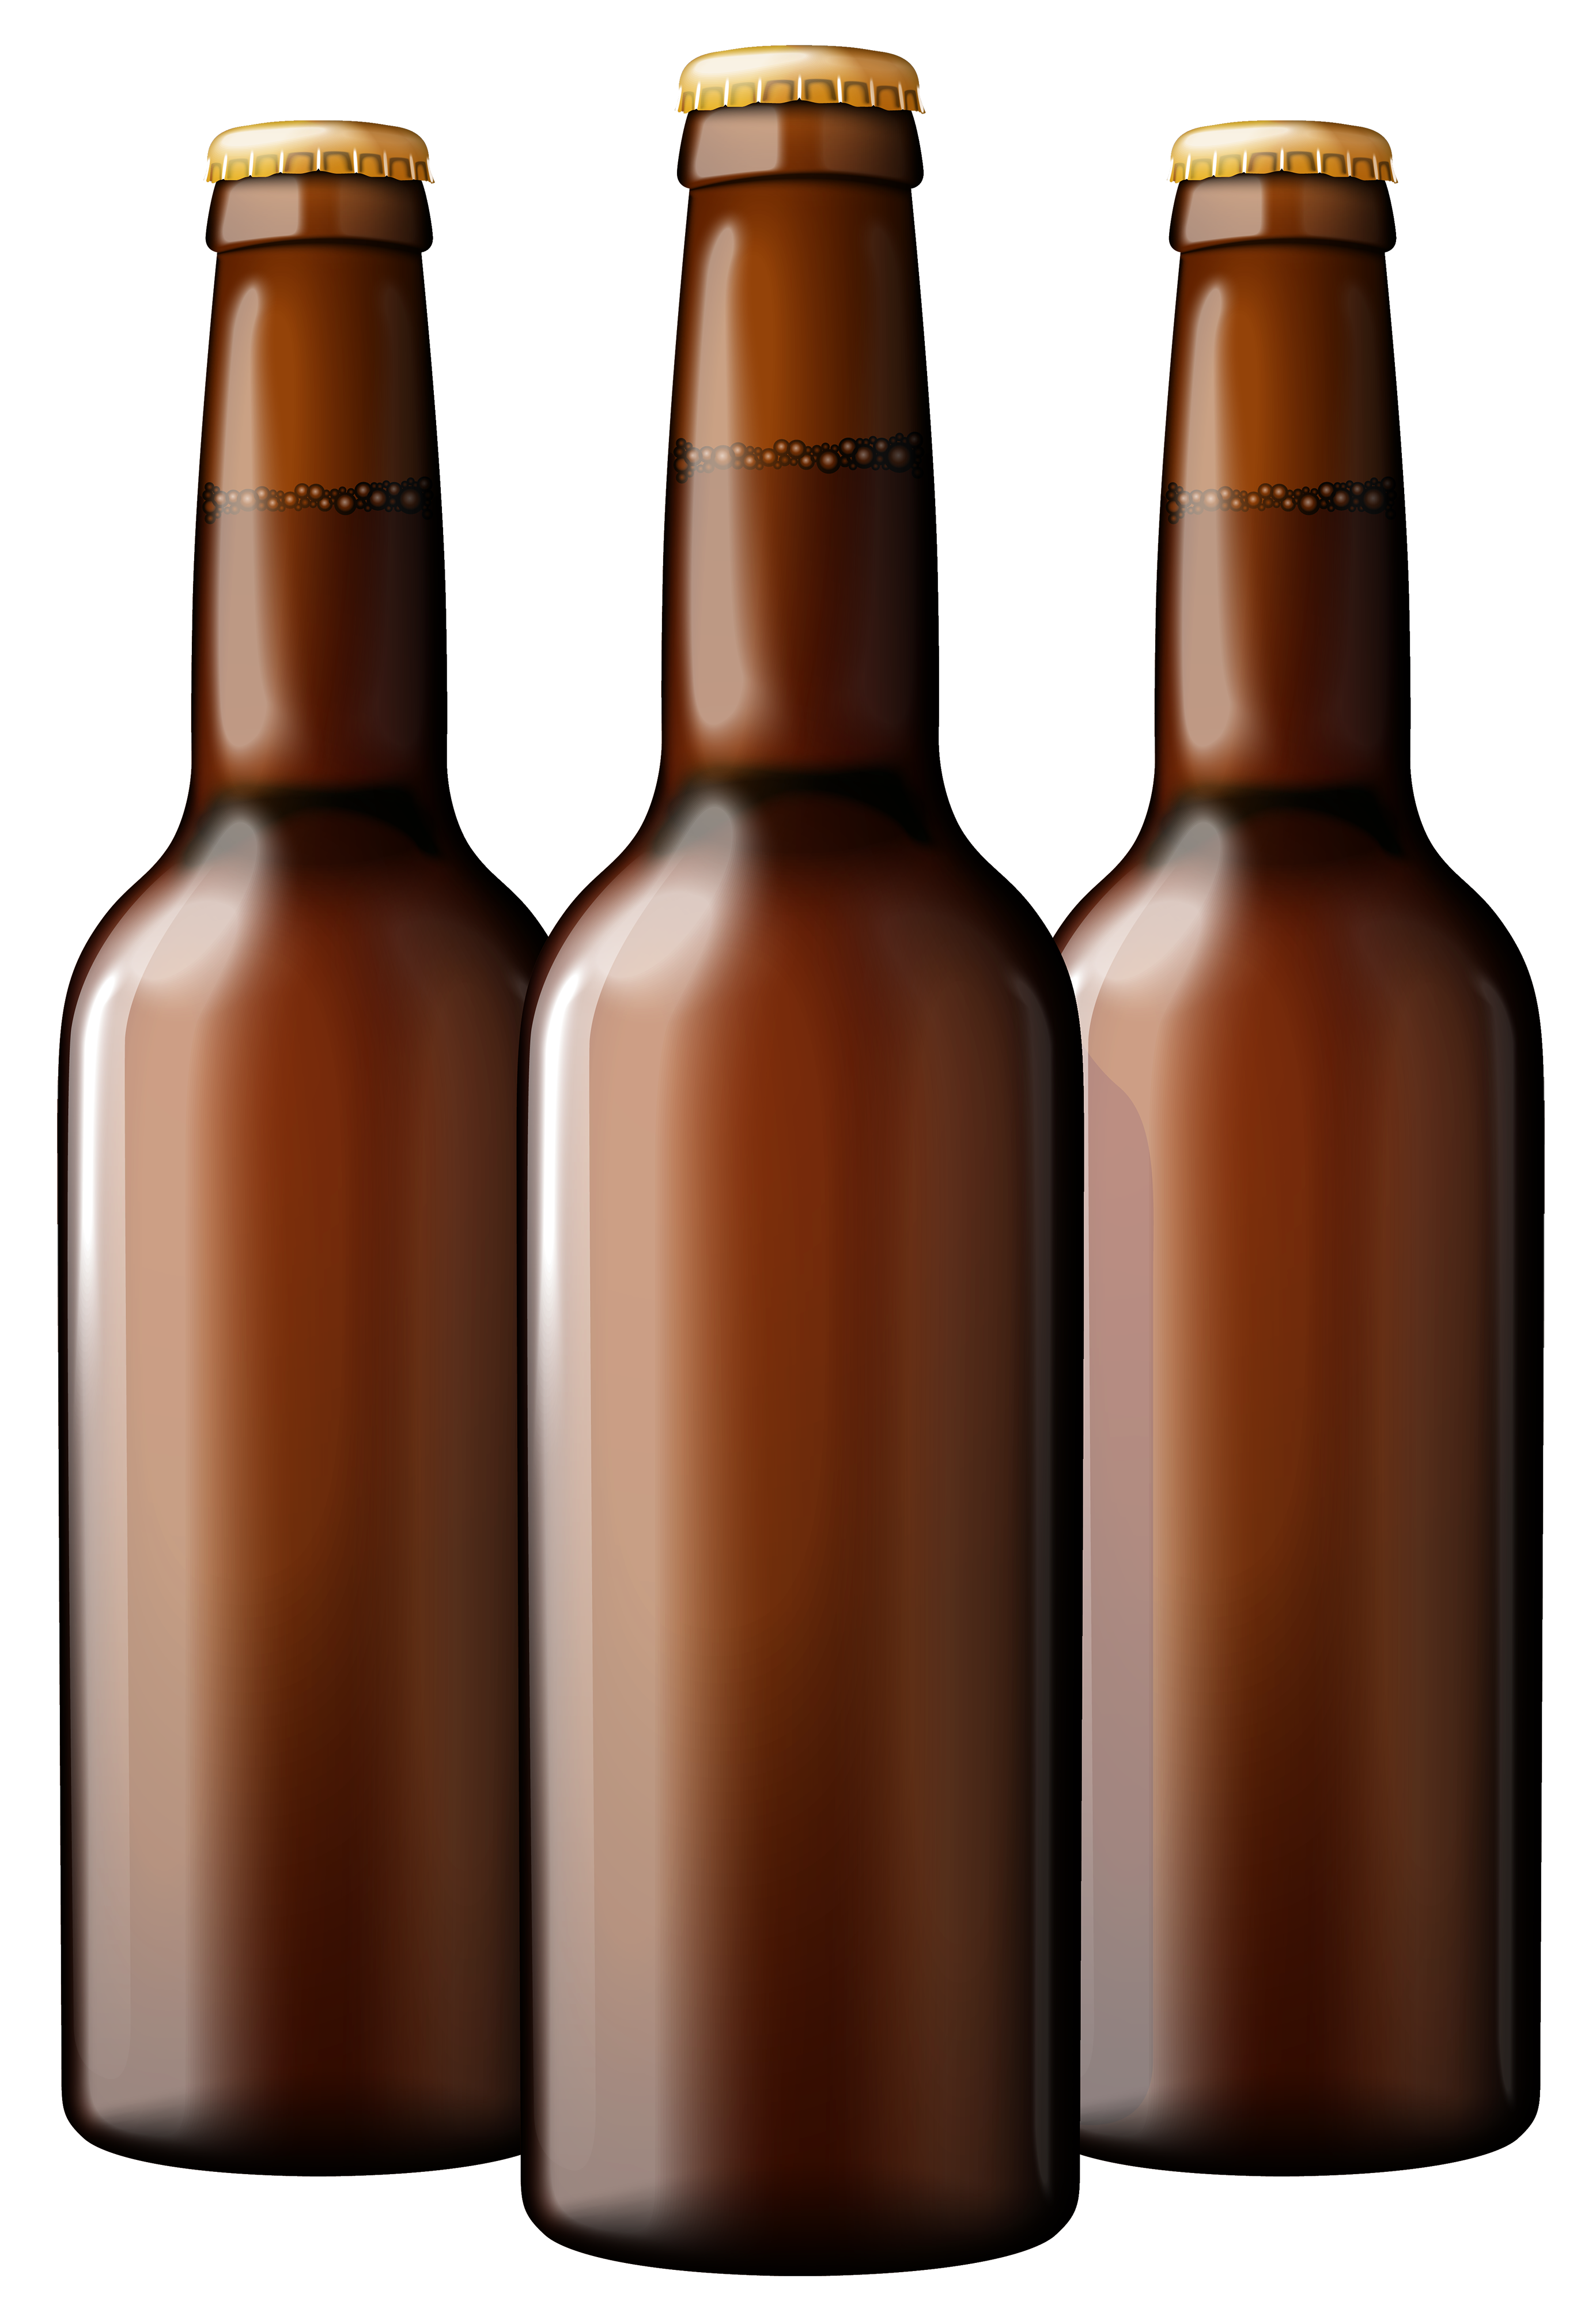 ... isolated beer bottles set